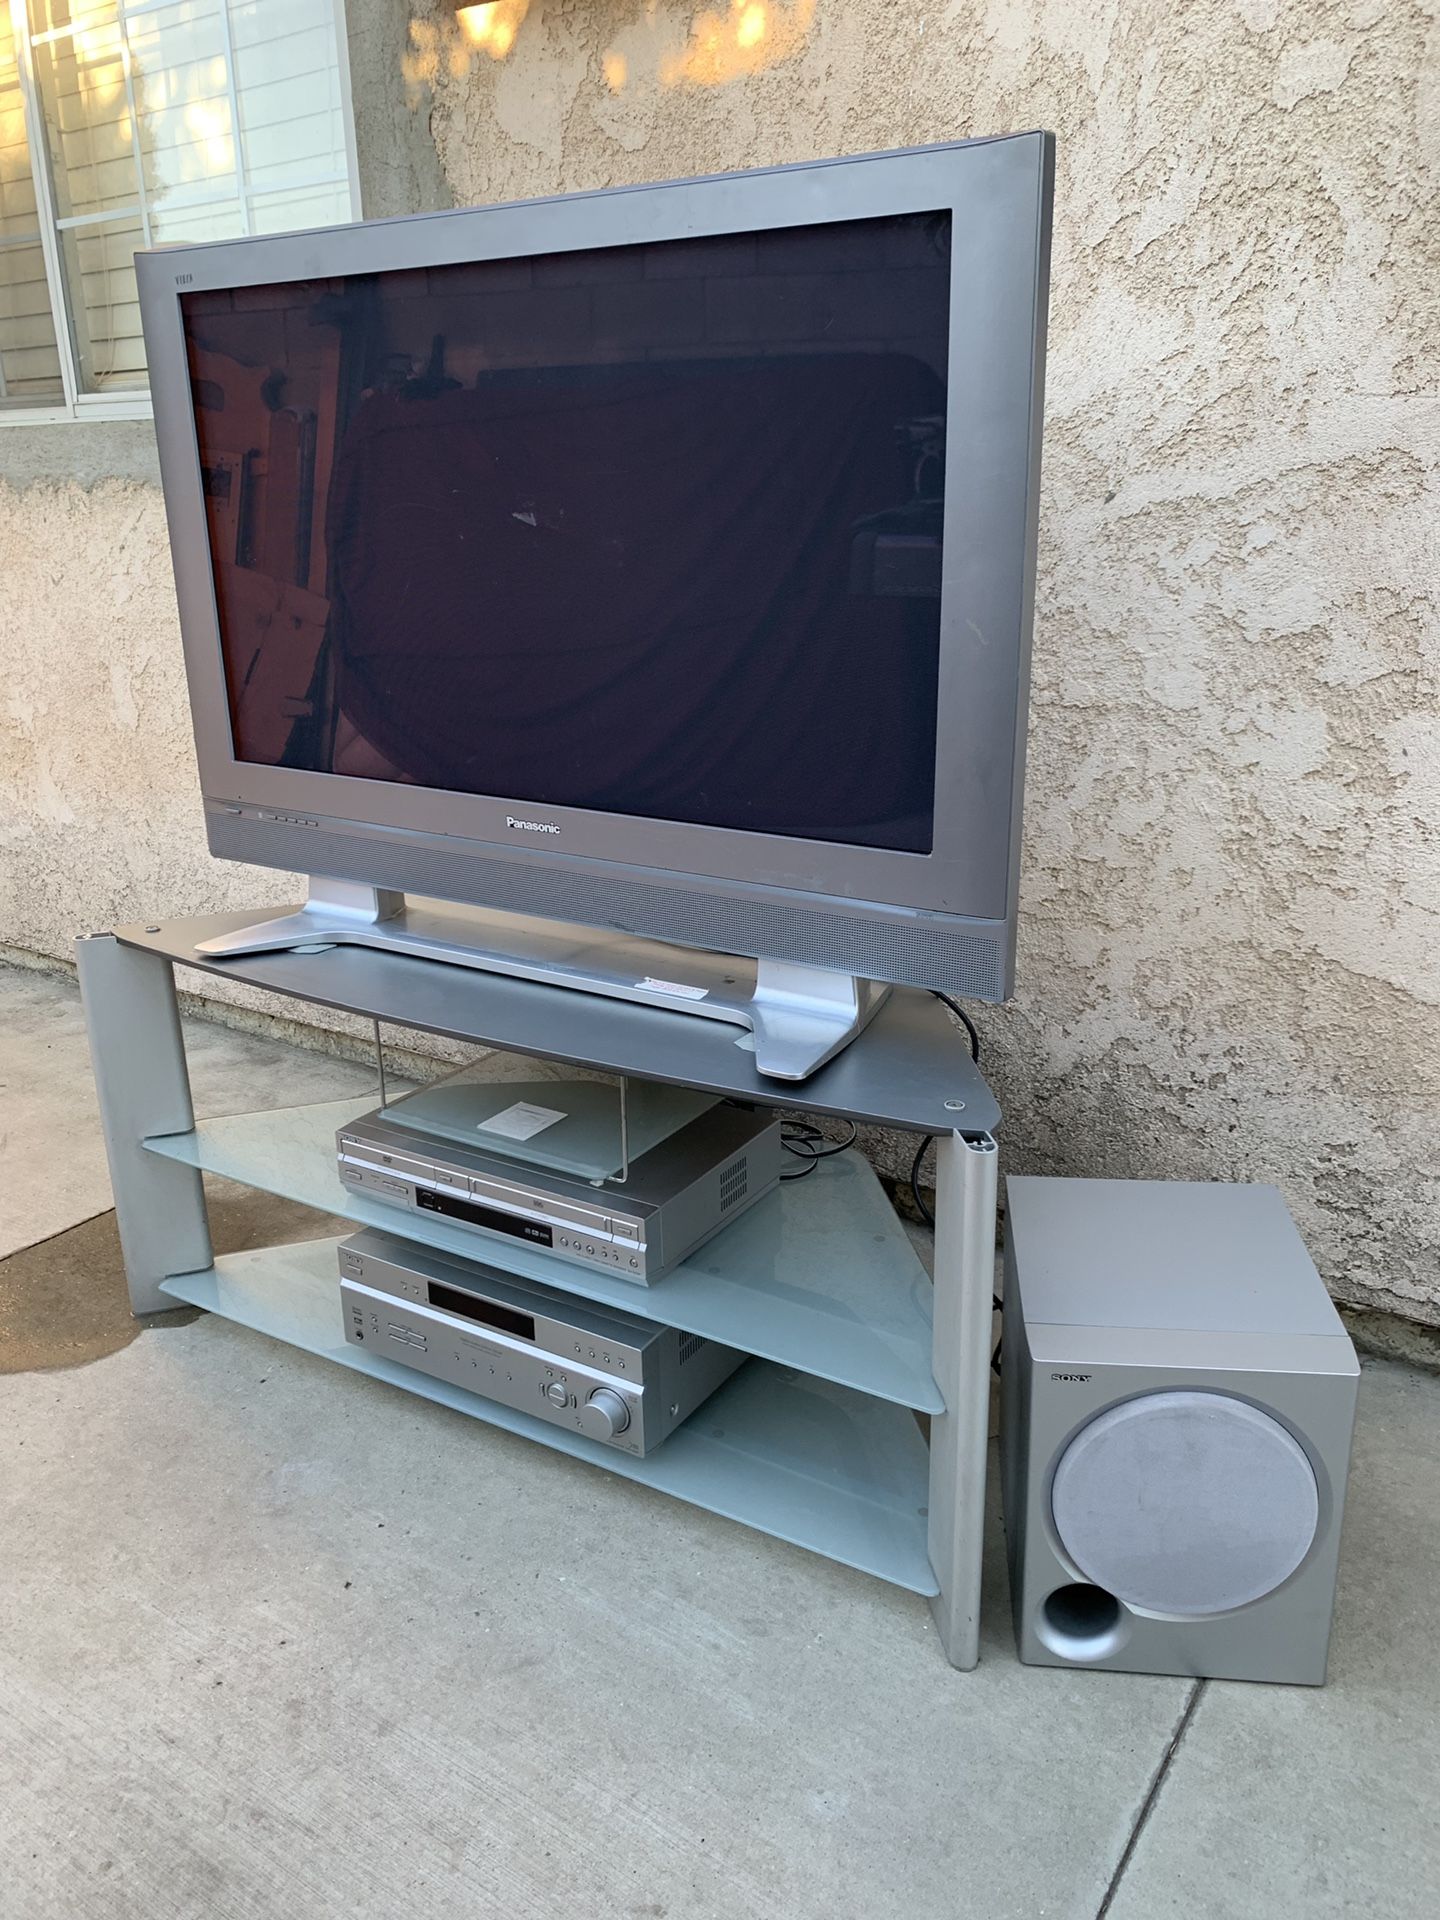 Panasonic 43” tv with tv stand and surround sound system Sony